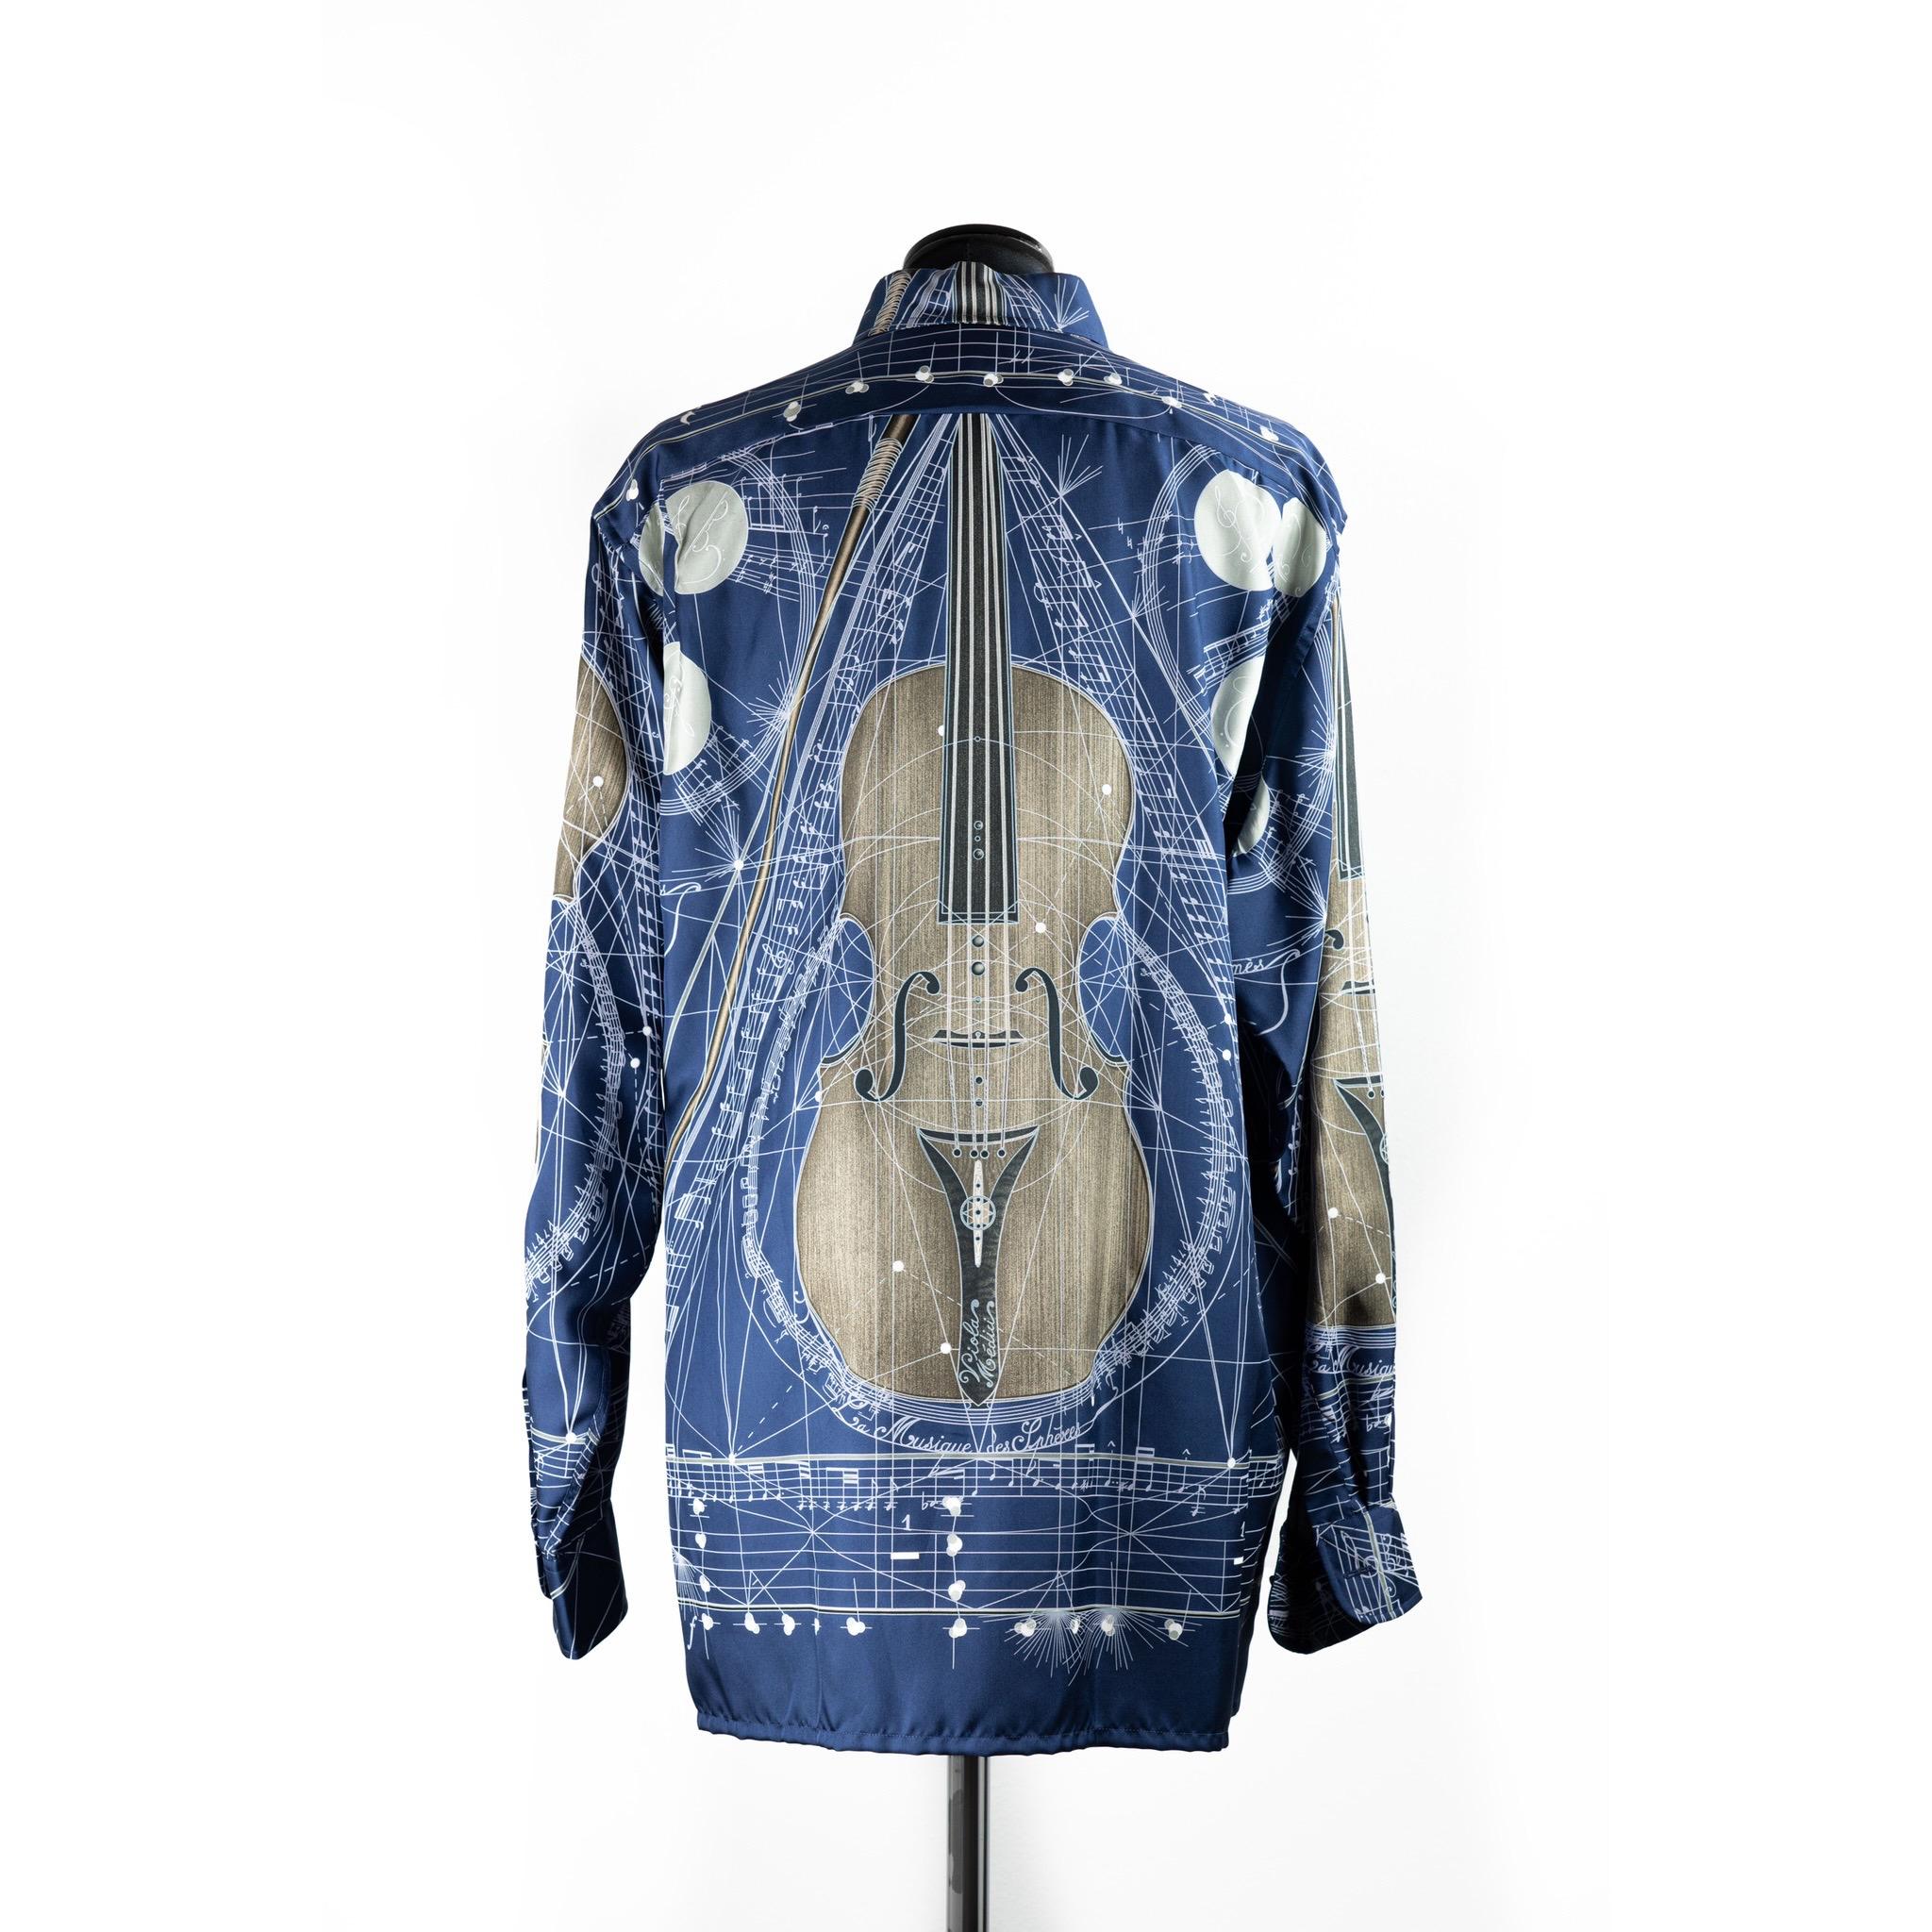 Hermès shirt in 100% silk.
Fabric graphic designed by Zoe Pavwels.
Zoe created this elegant piece in 1996. Titled 'La Musique Des Spheres', it depicts a celestial and musical Stradivarius violin and tells the legend that the stars, in perpetual